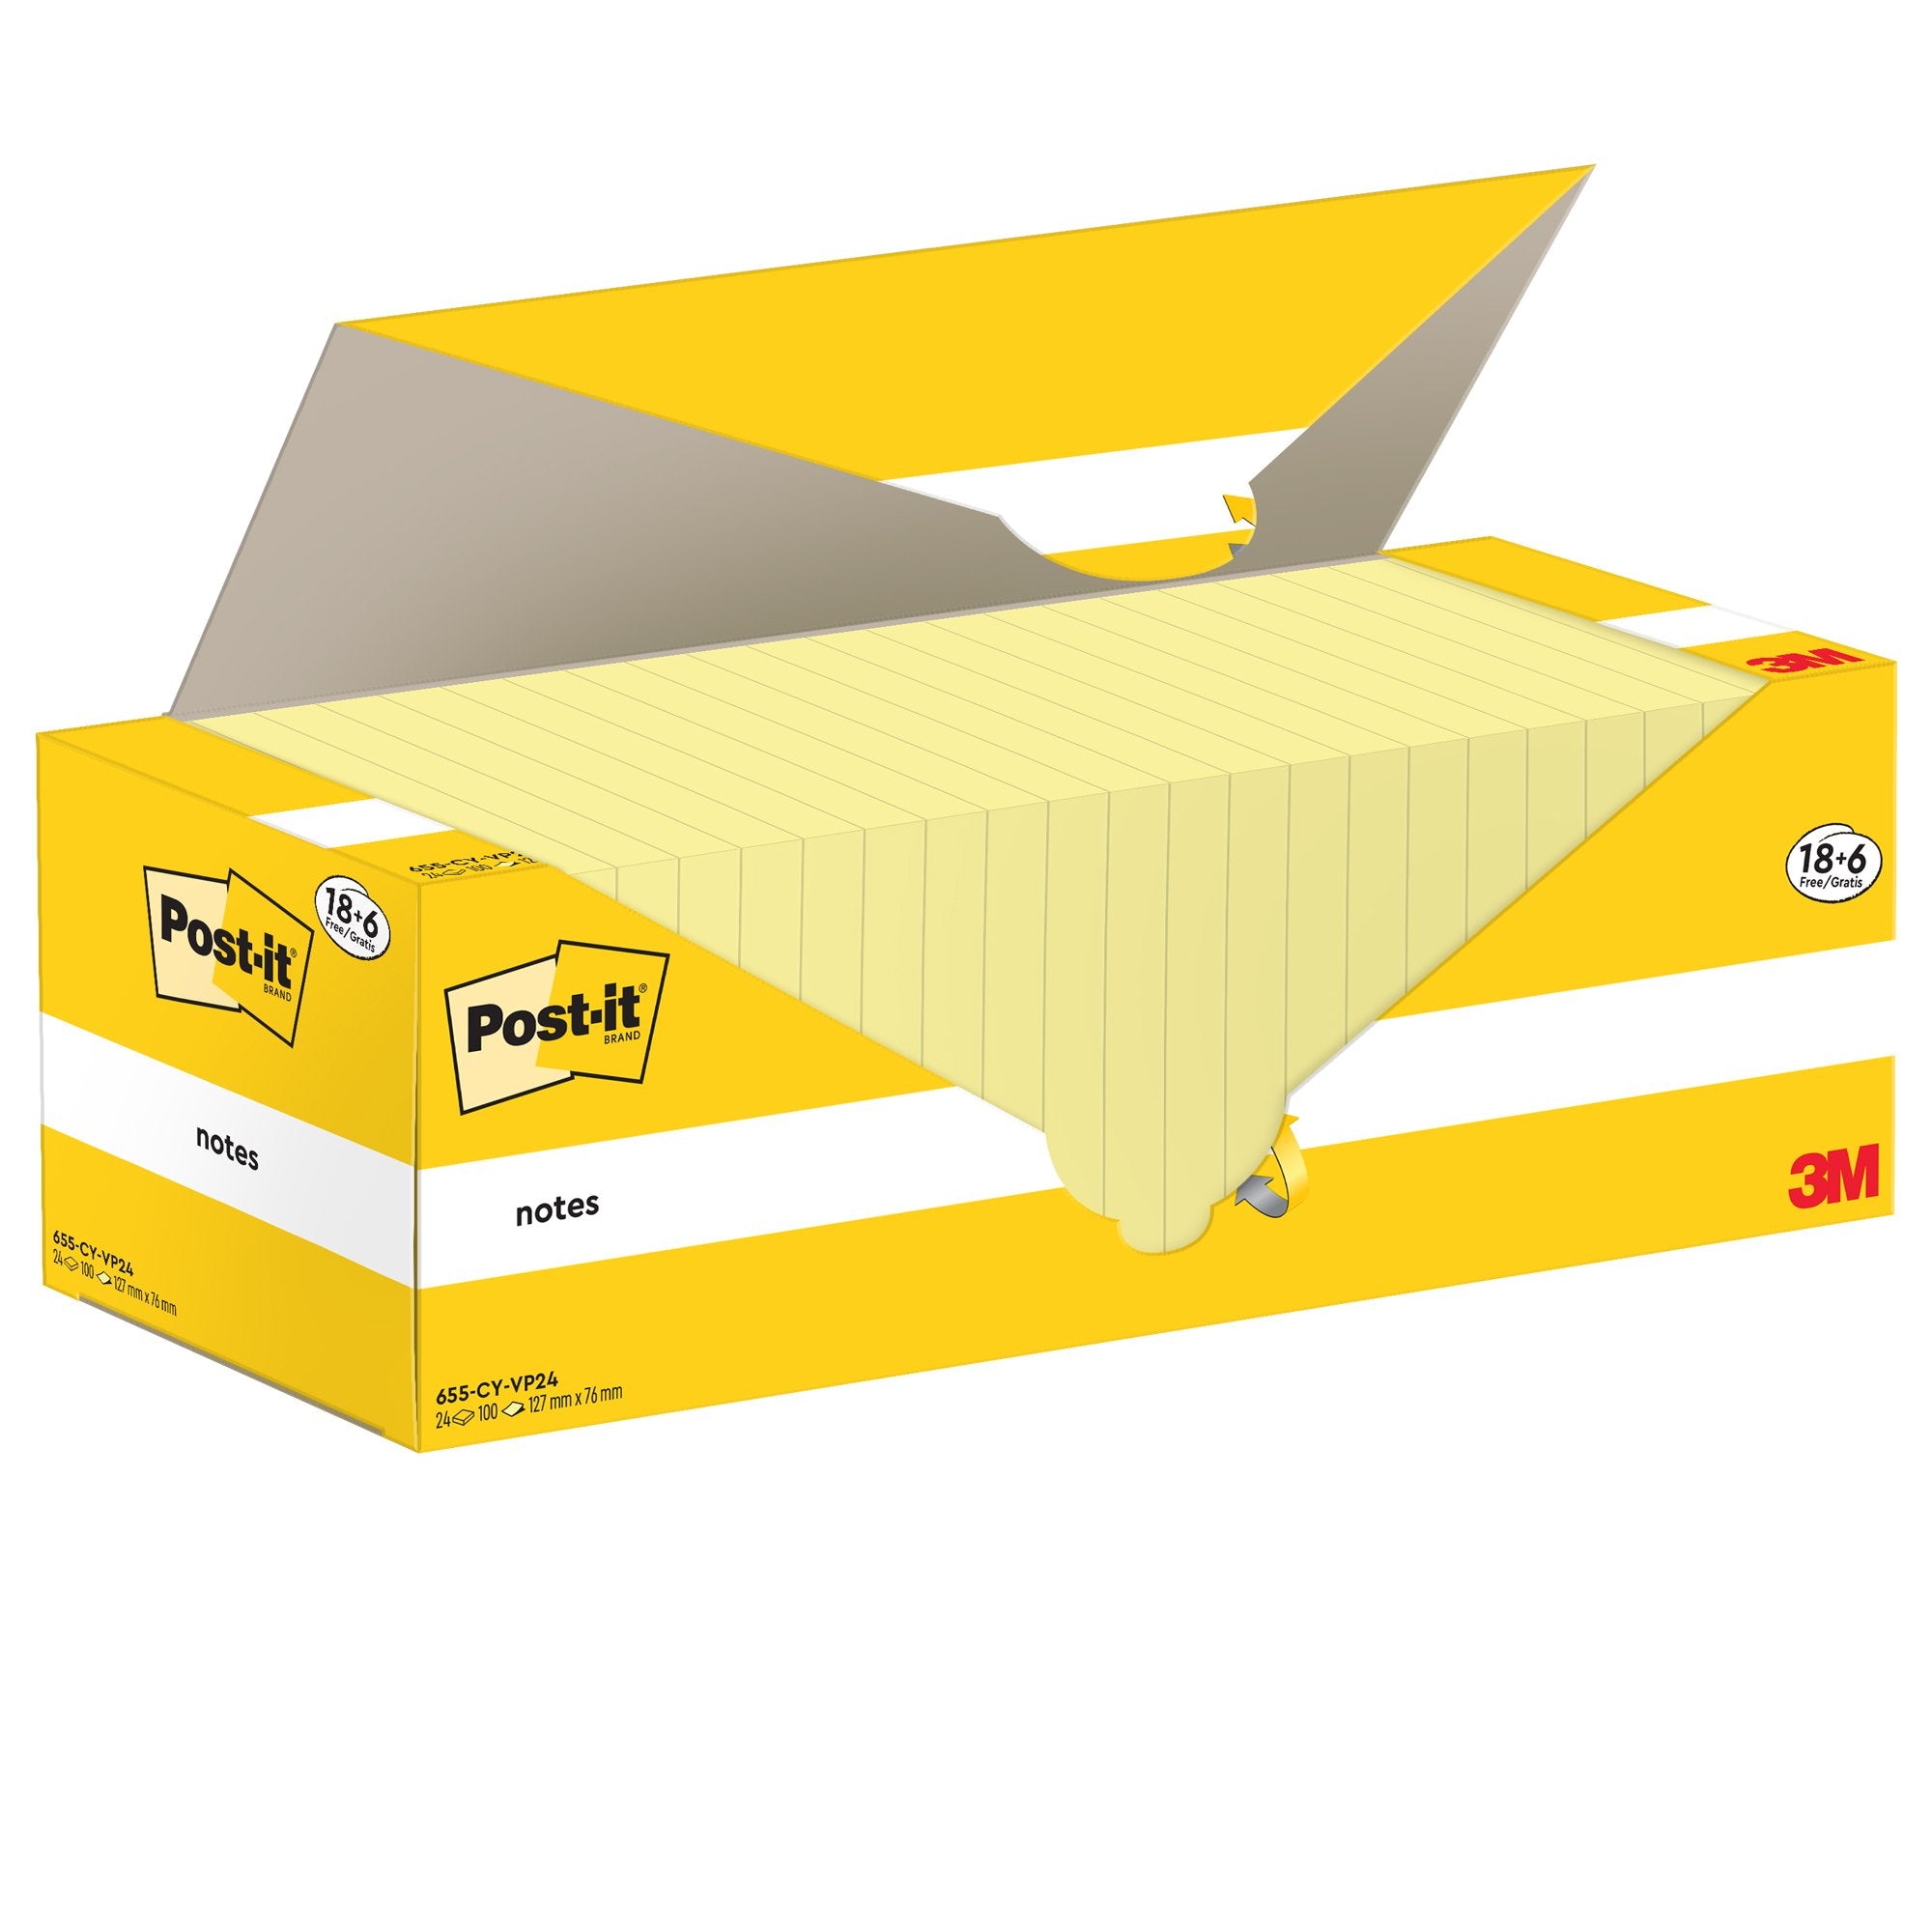 post-it-cf-186pz-blocco-100fg-notes-76x127mm-655-cy-vp24-giallo-canary